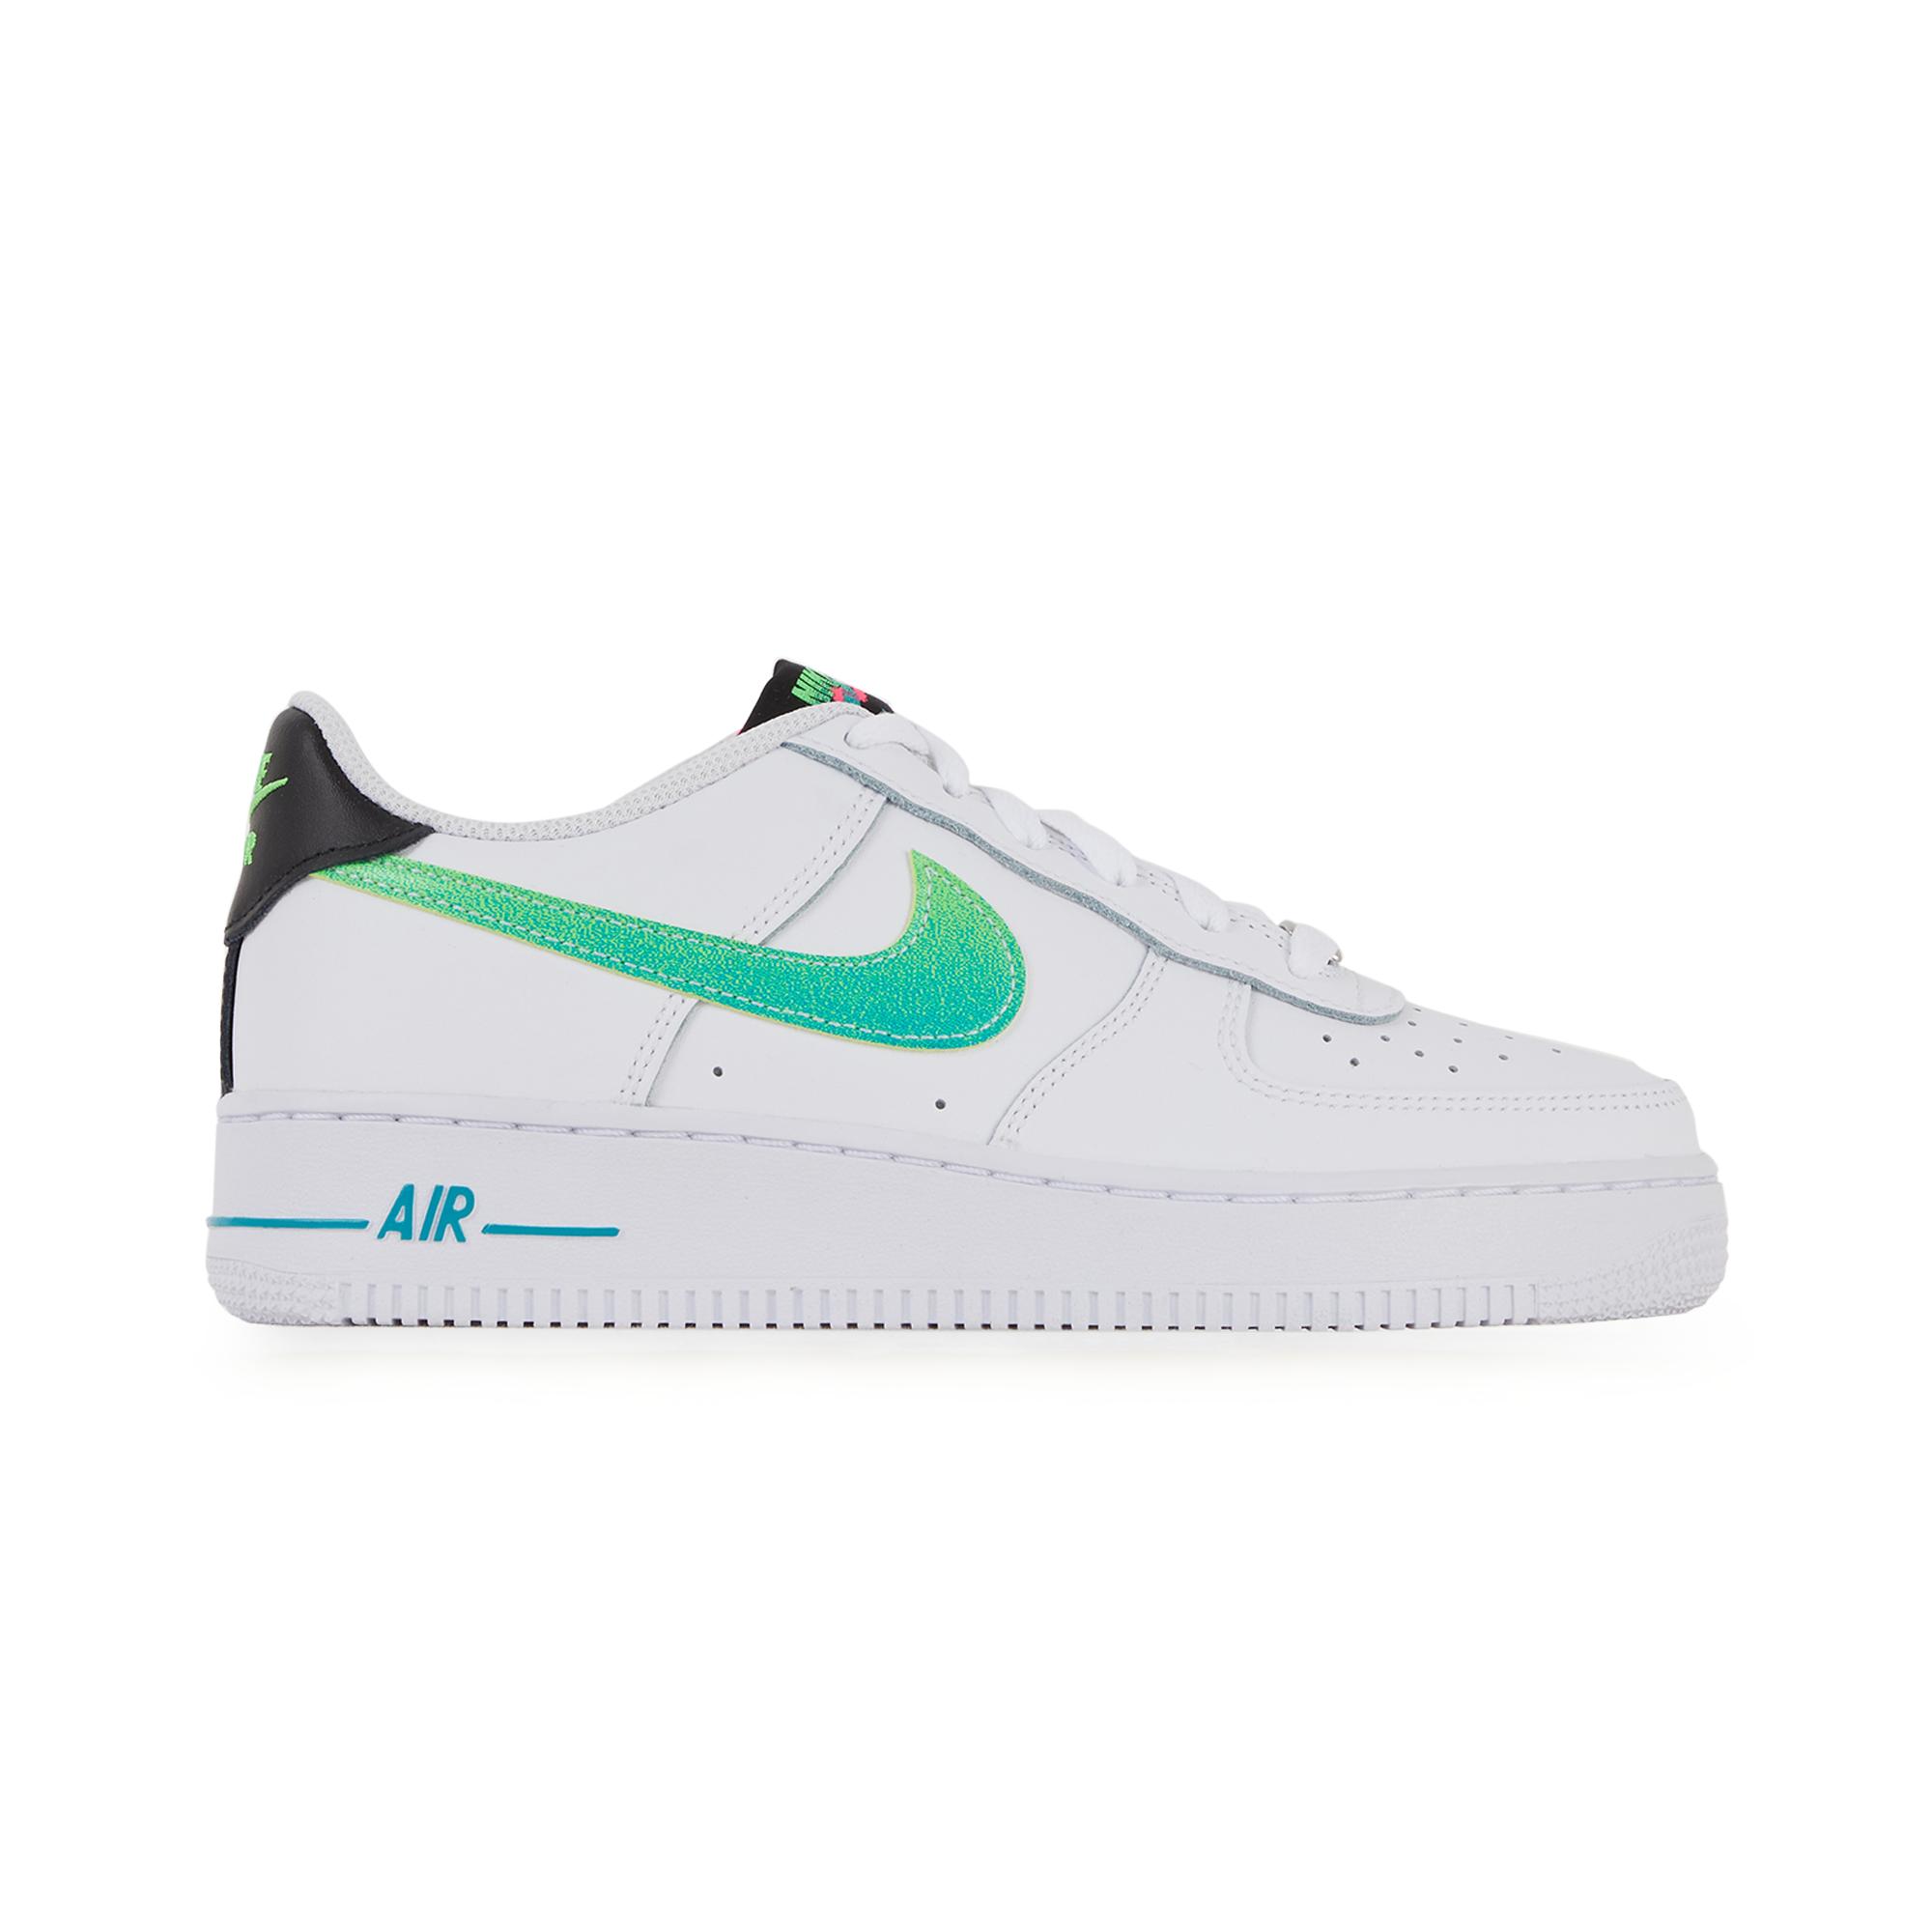 nike air force 1 low vert - Soldes magasin online OFF 62%